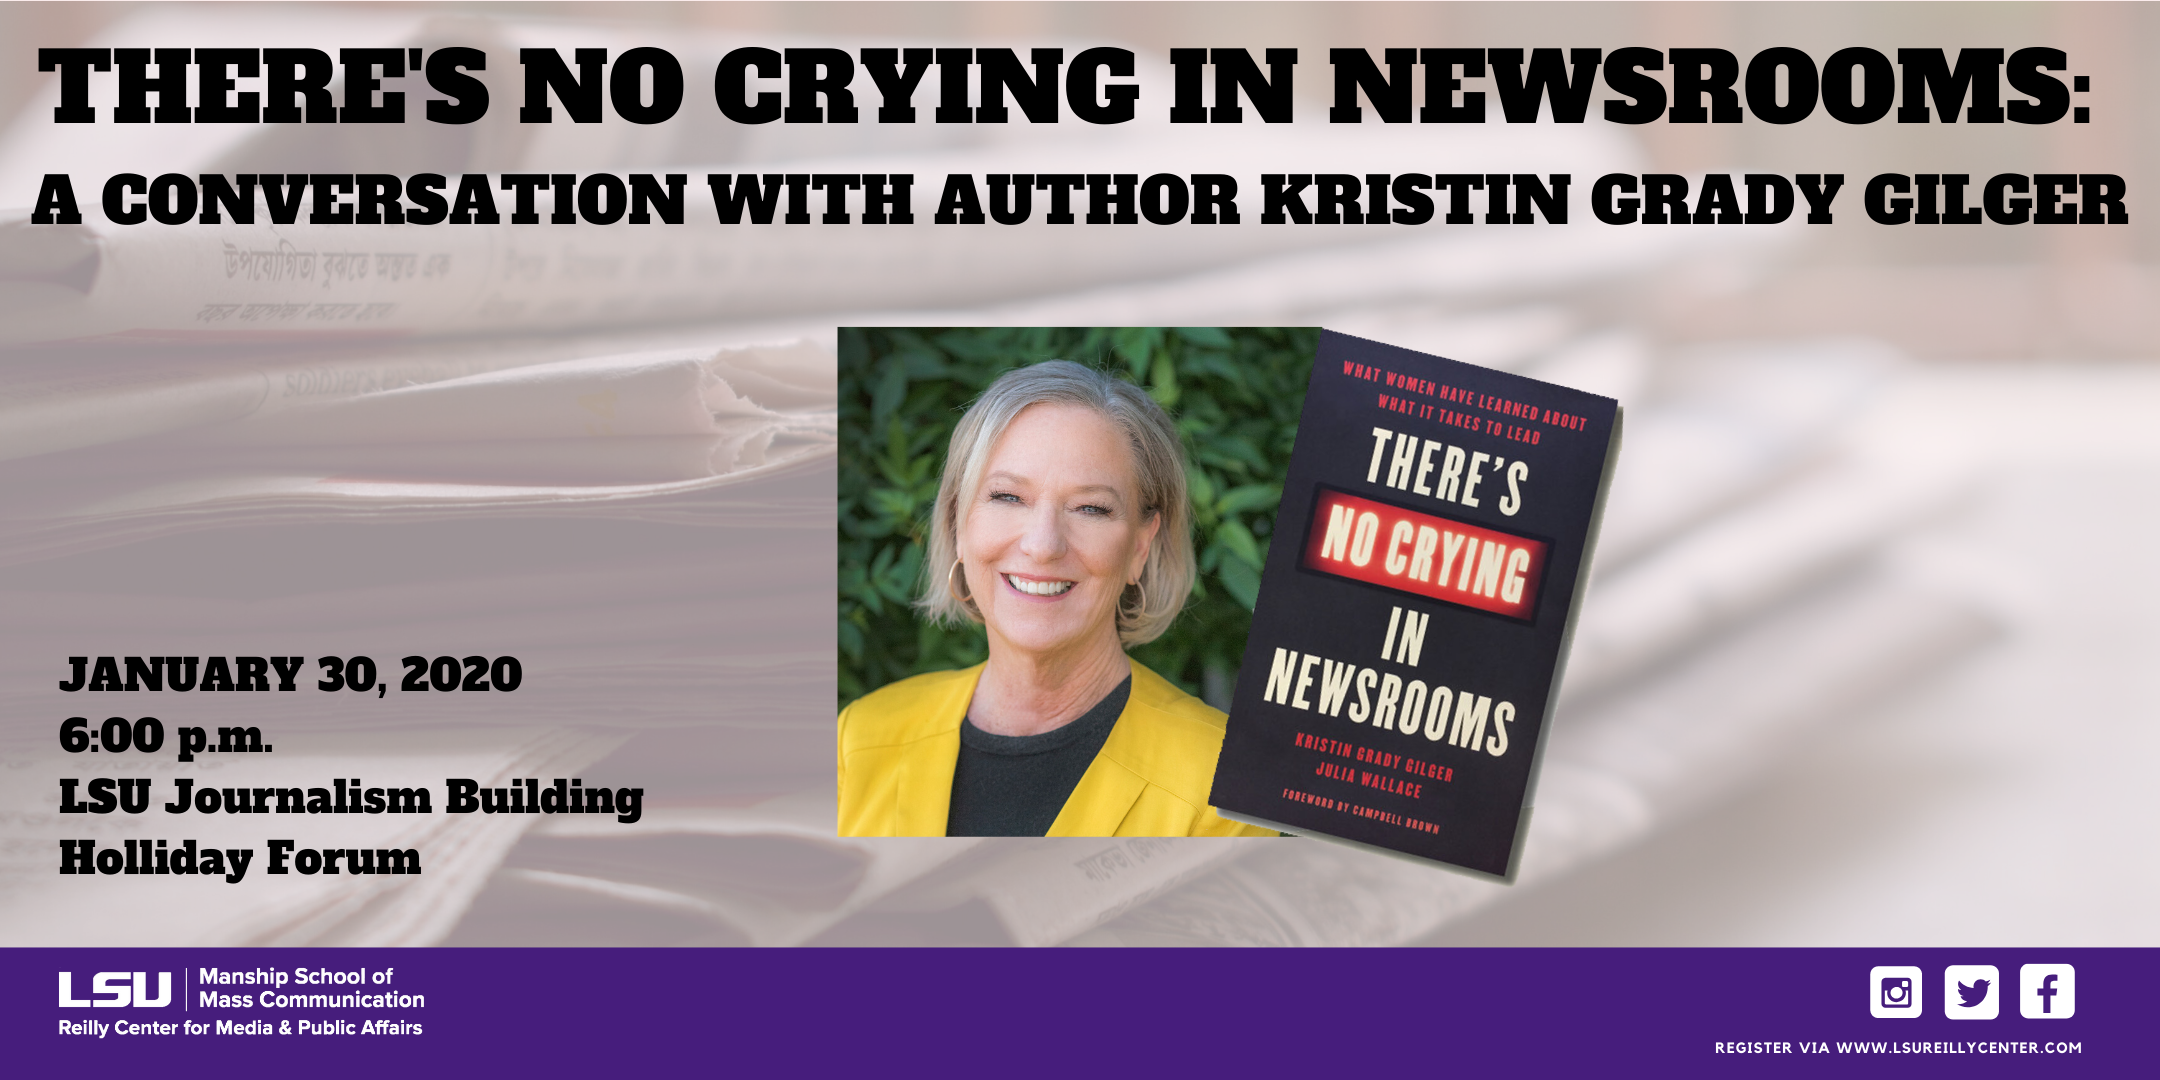 There's No Crying in Newsrooms: A Conversation with Author Kristin Gilger